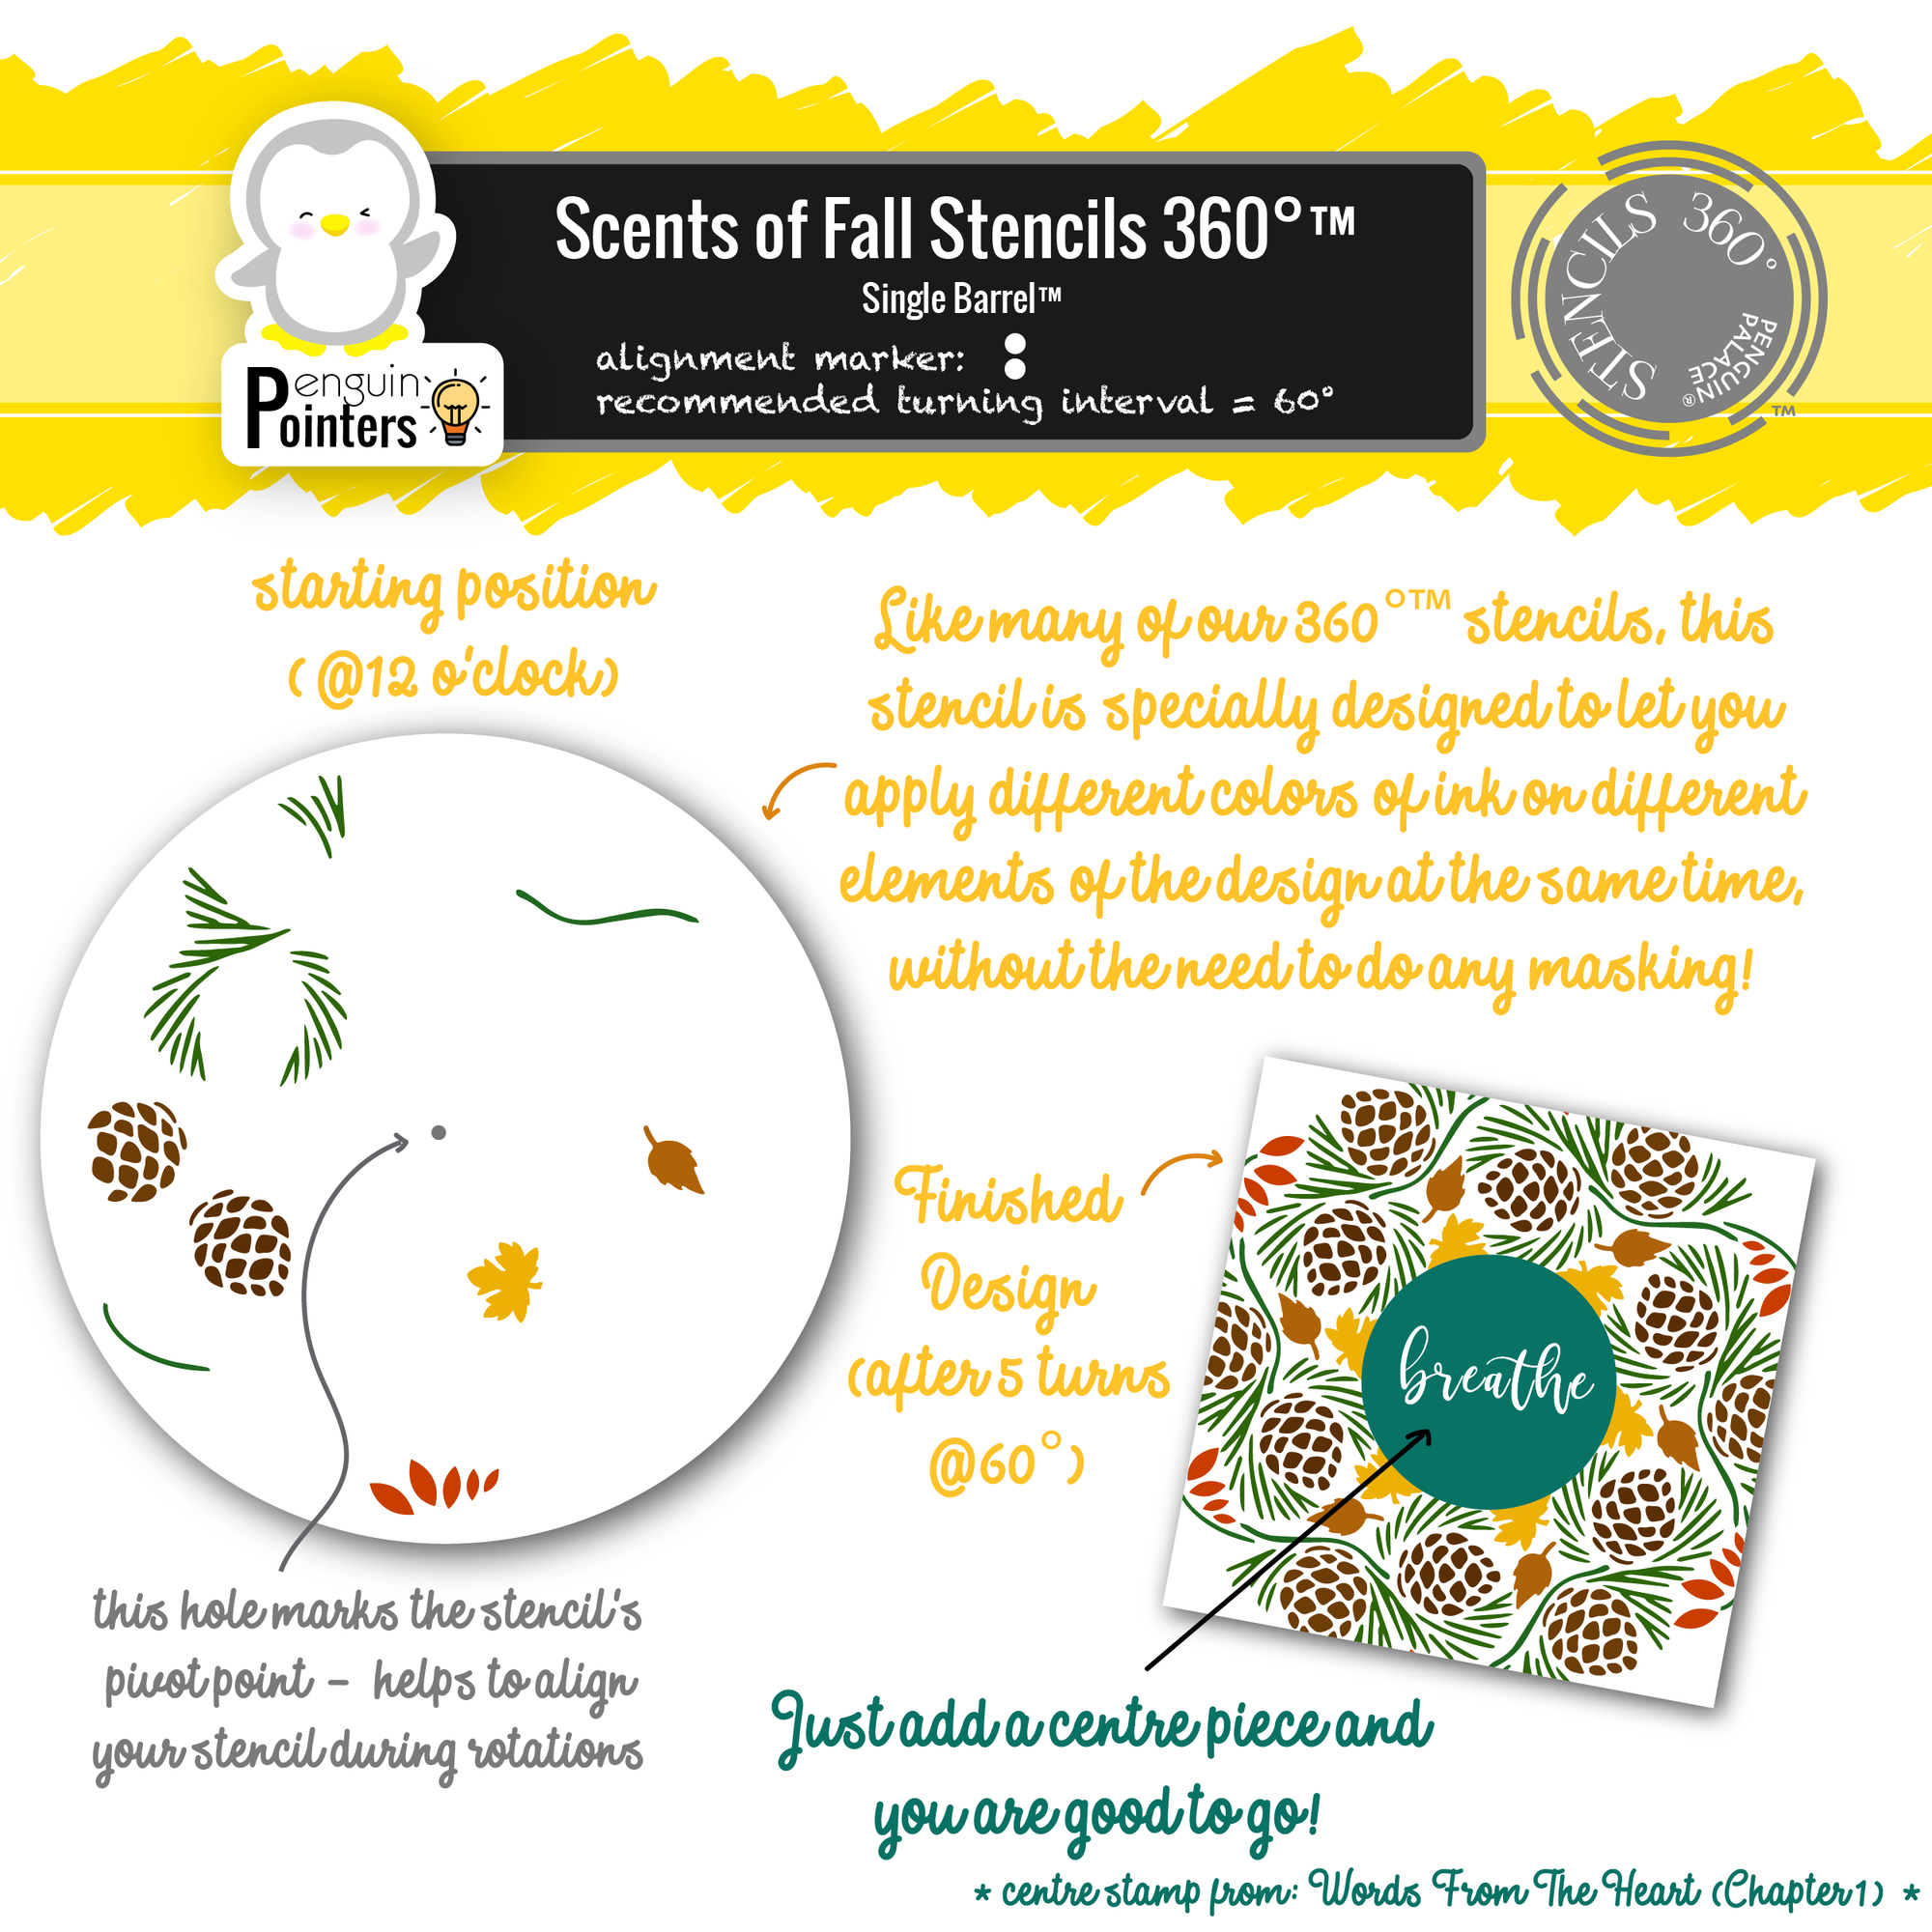 Scents of Fall Stencils 360°™